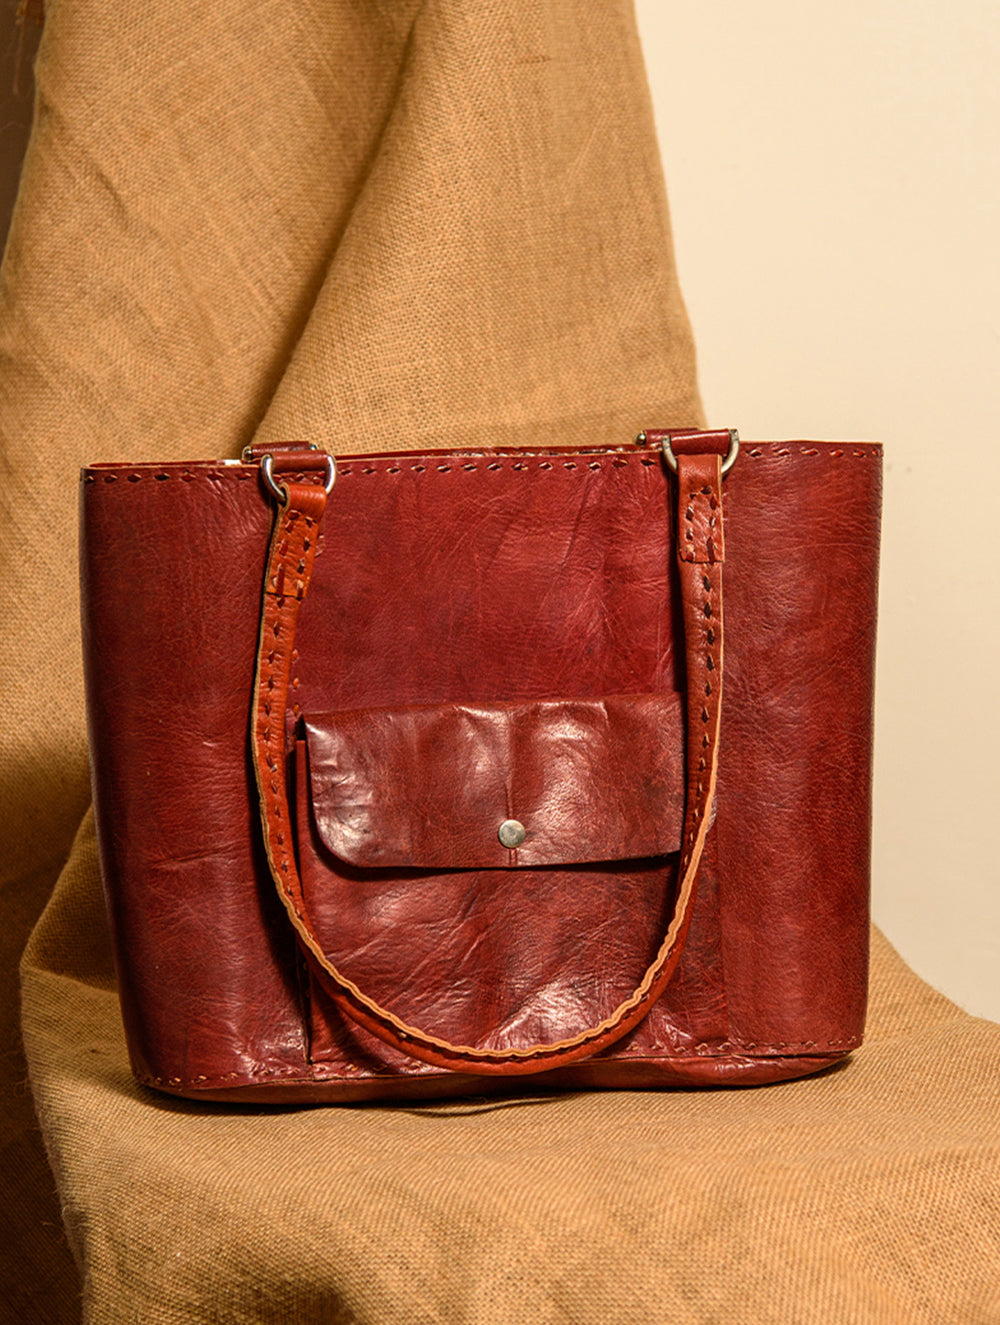 Load image into Gallery viewer, Handcrafted Jawaja Leather Tote Bag with Front Pocket